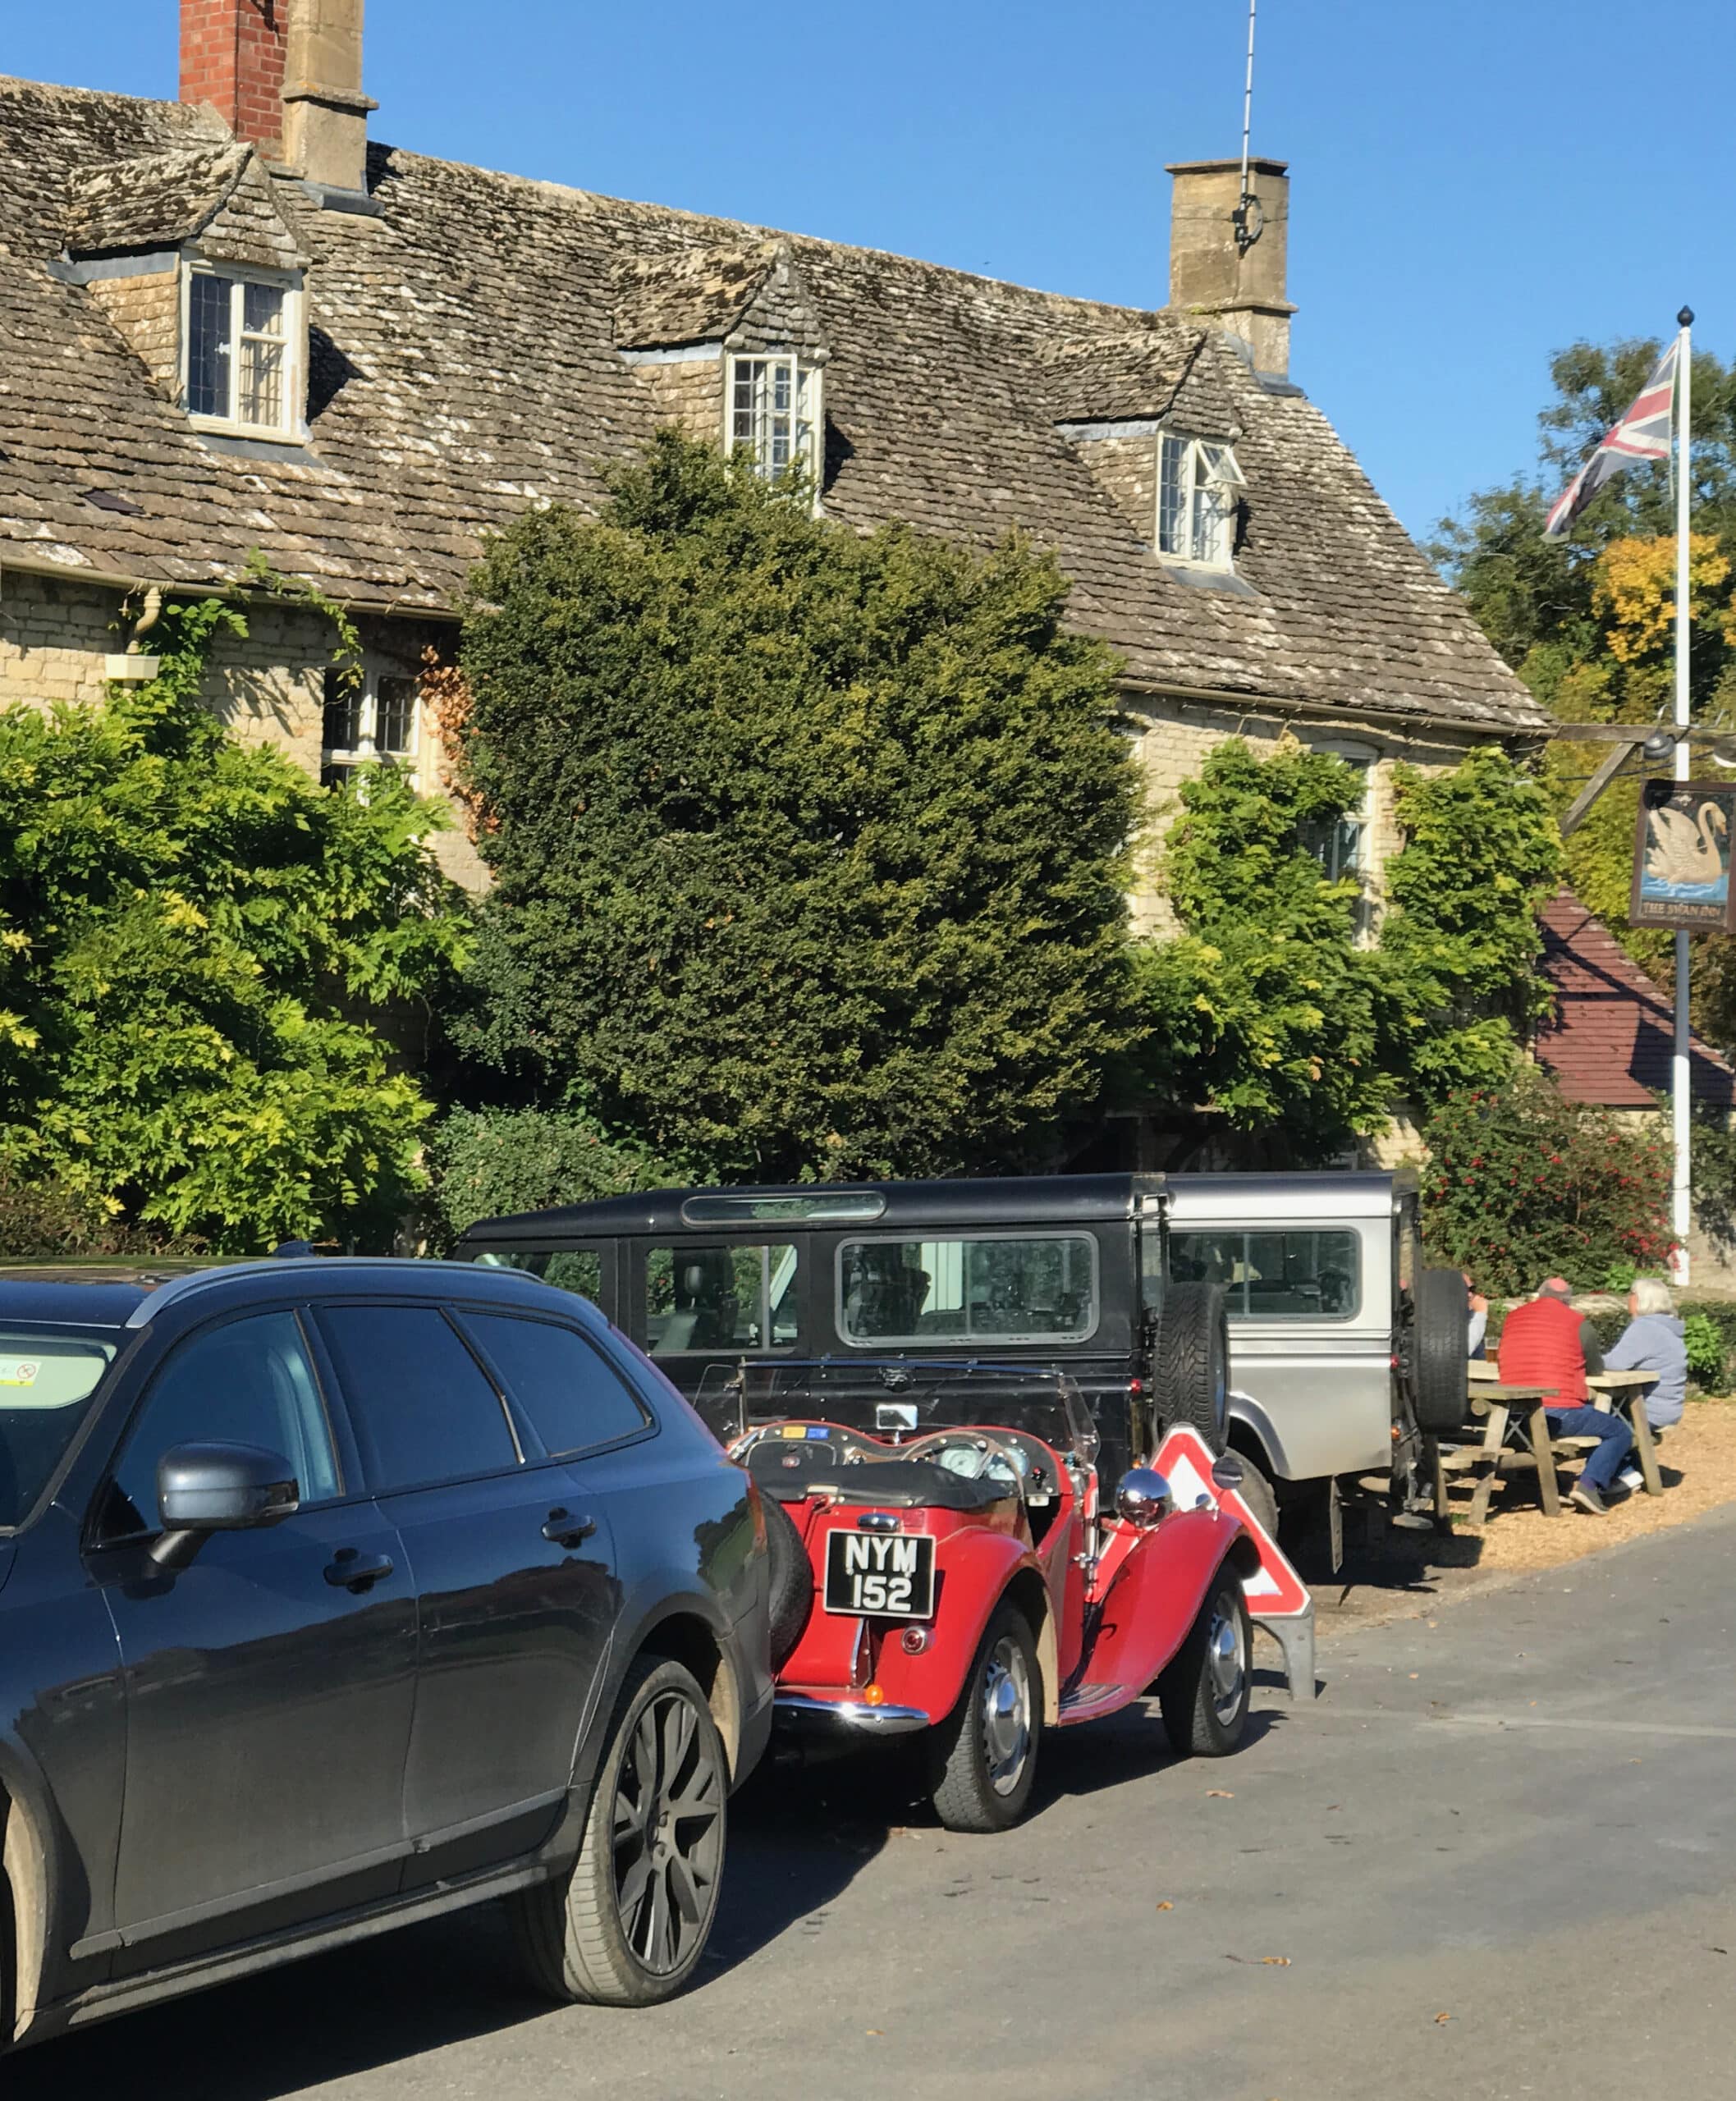 from The Cotswolds: Make a Grand Entrance in Burford on Slow Down, See More